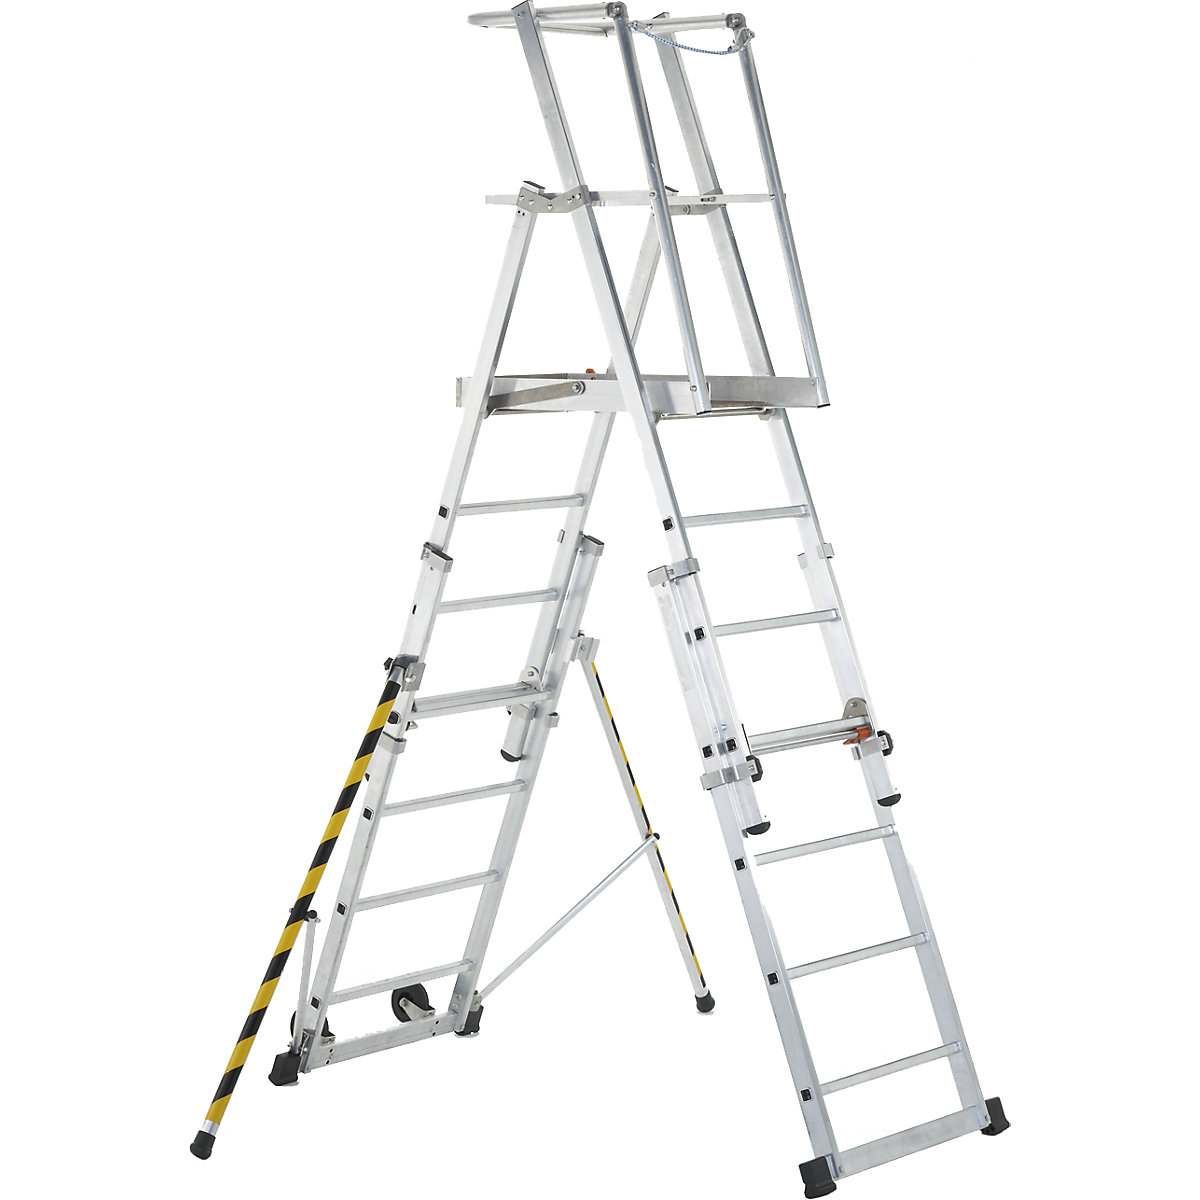 Telescopic mobile safety steps – ZARGES, made of aluminium, 7 rungs with stabilisers-1